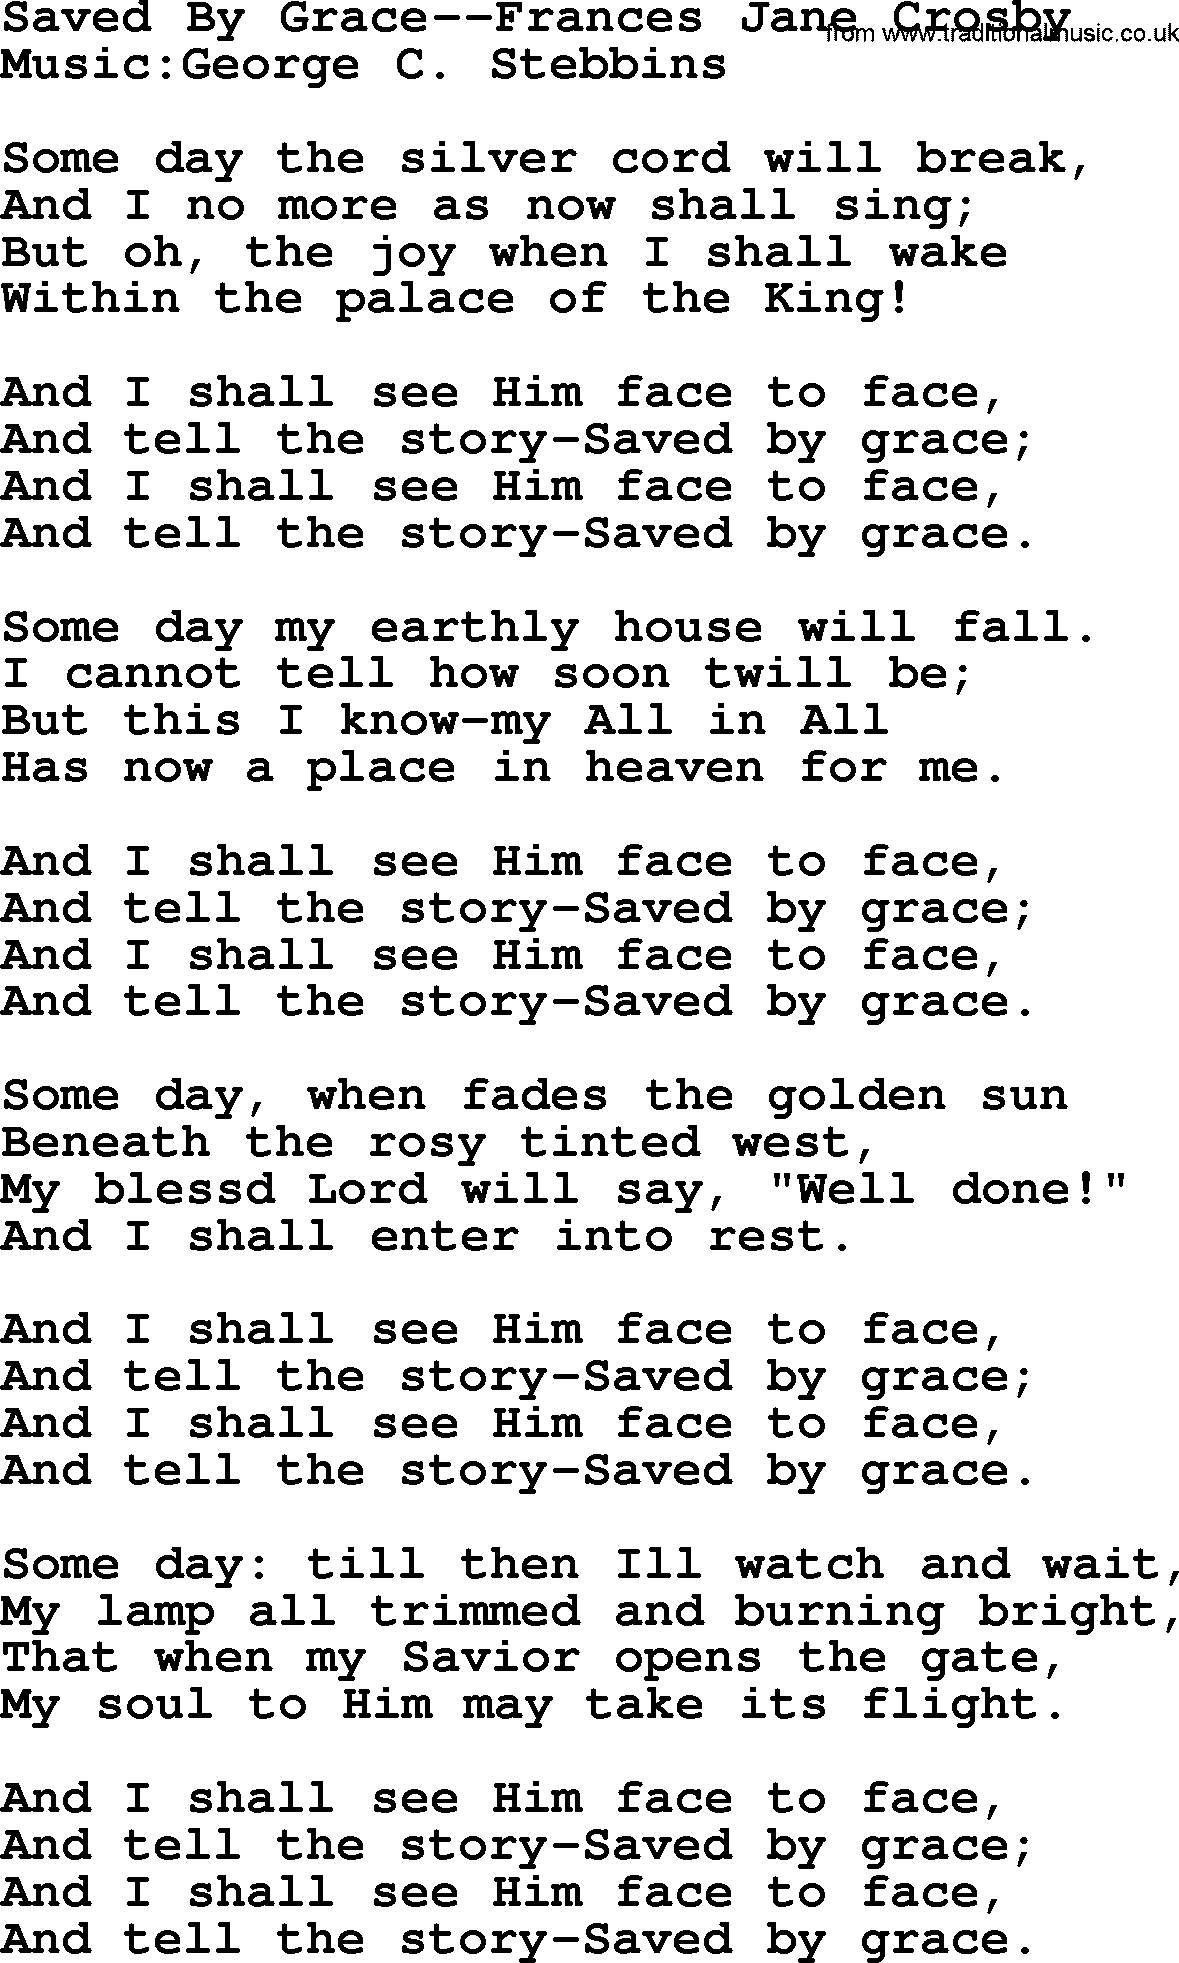 100+ Christian Funeral Hymns collection, Hymn: Saved By Grace-Frances Jane Crosby, lyrics and PDF